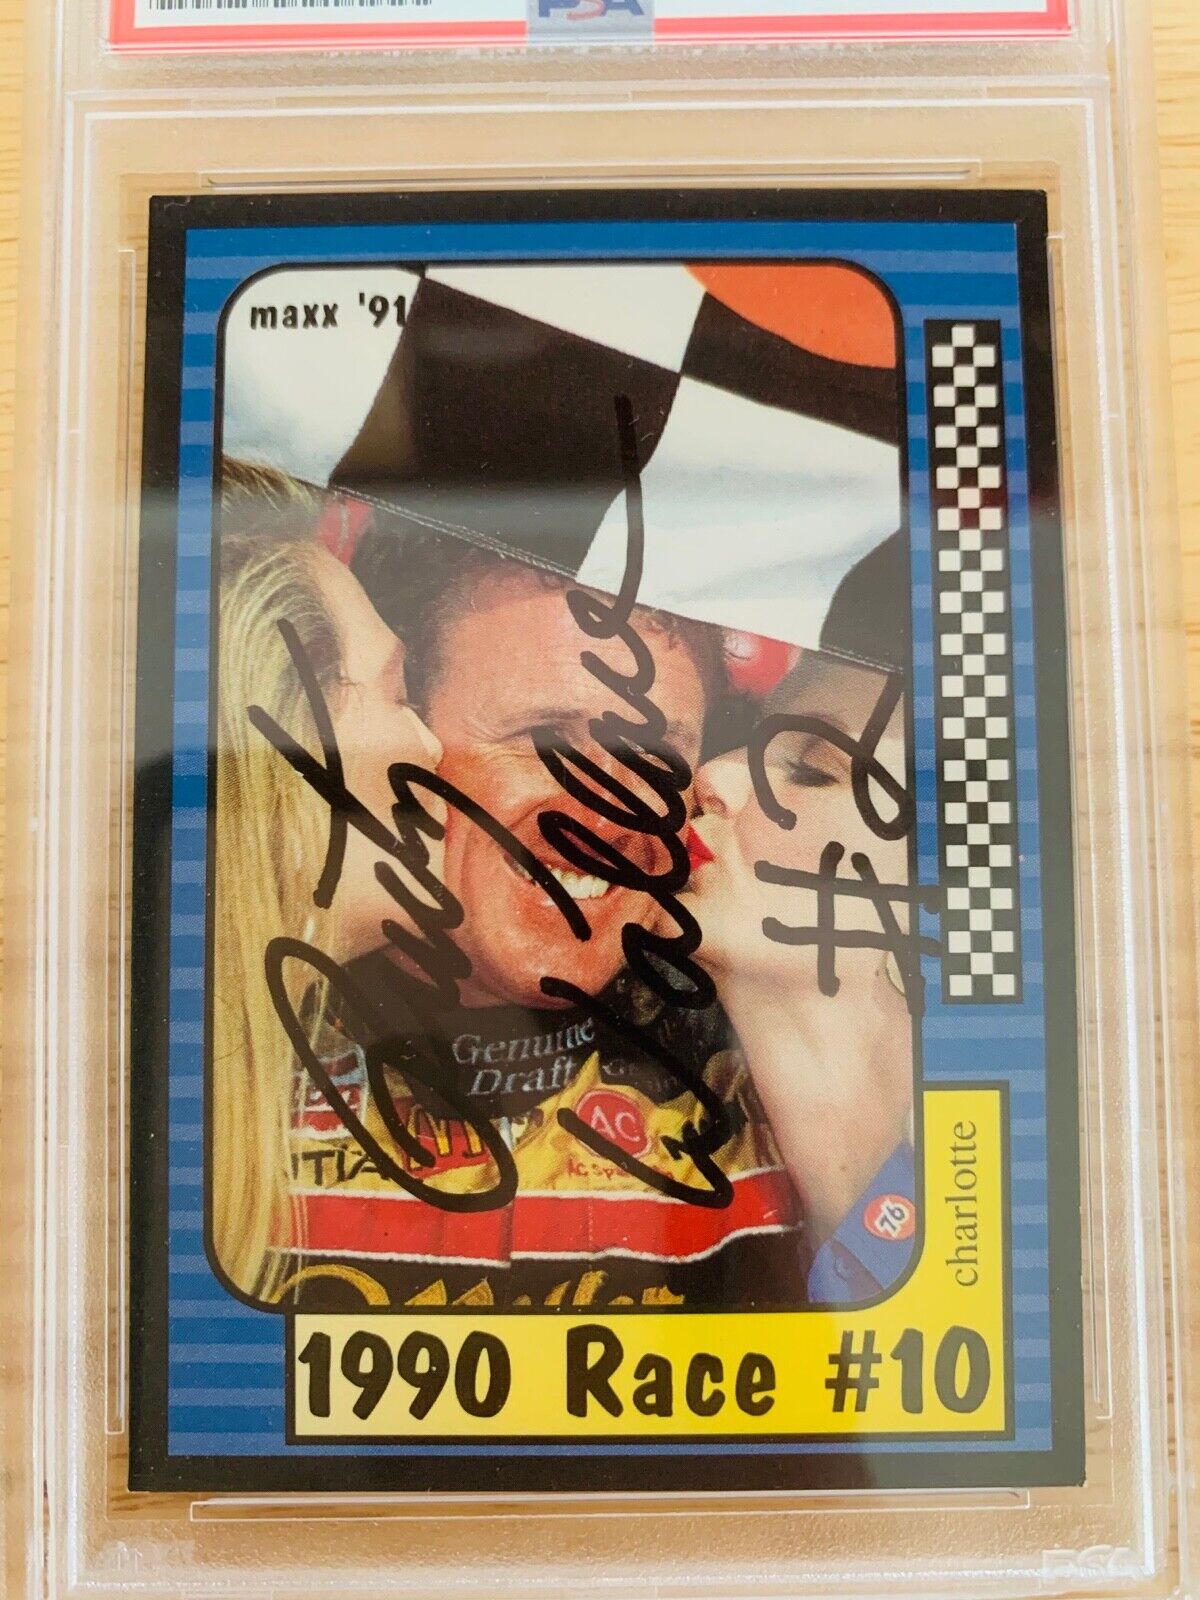 Rusty Wallace Autographed 1991 MAXX Auto Racing Card PSA Certified Slabbed